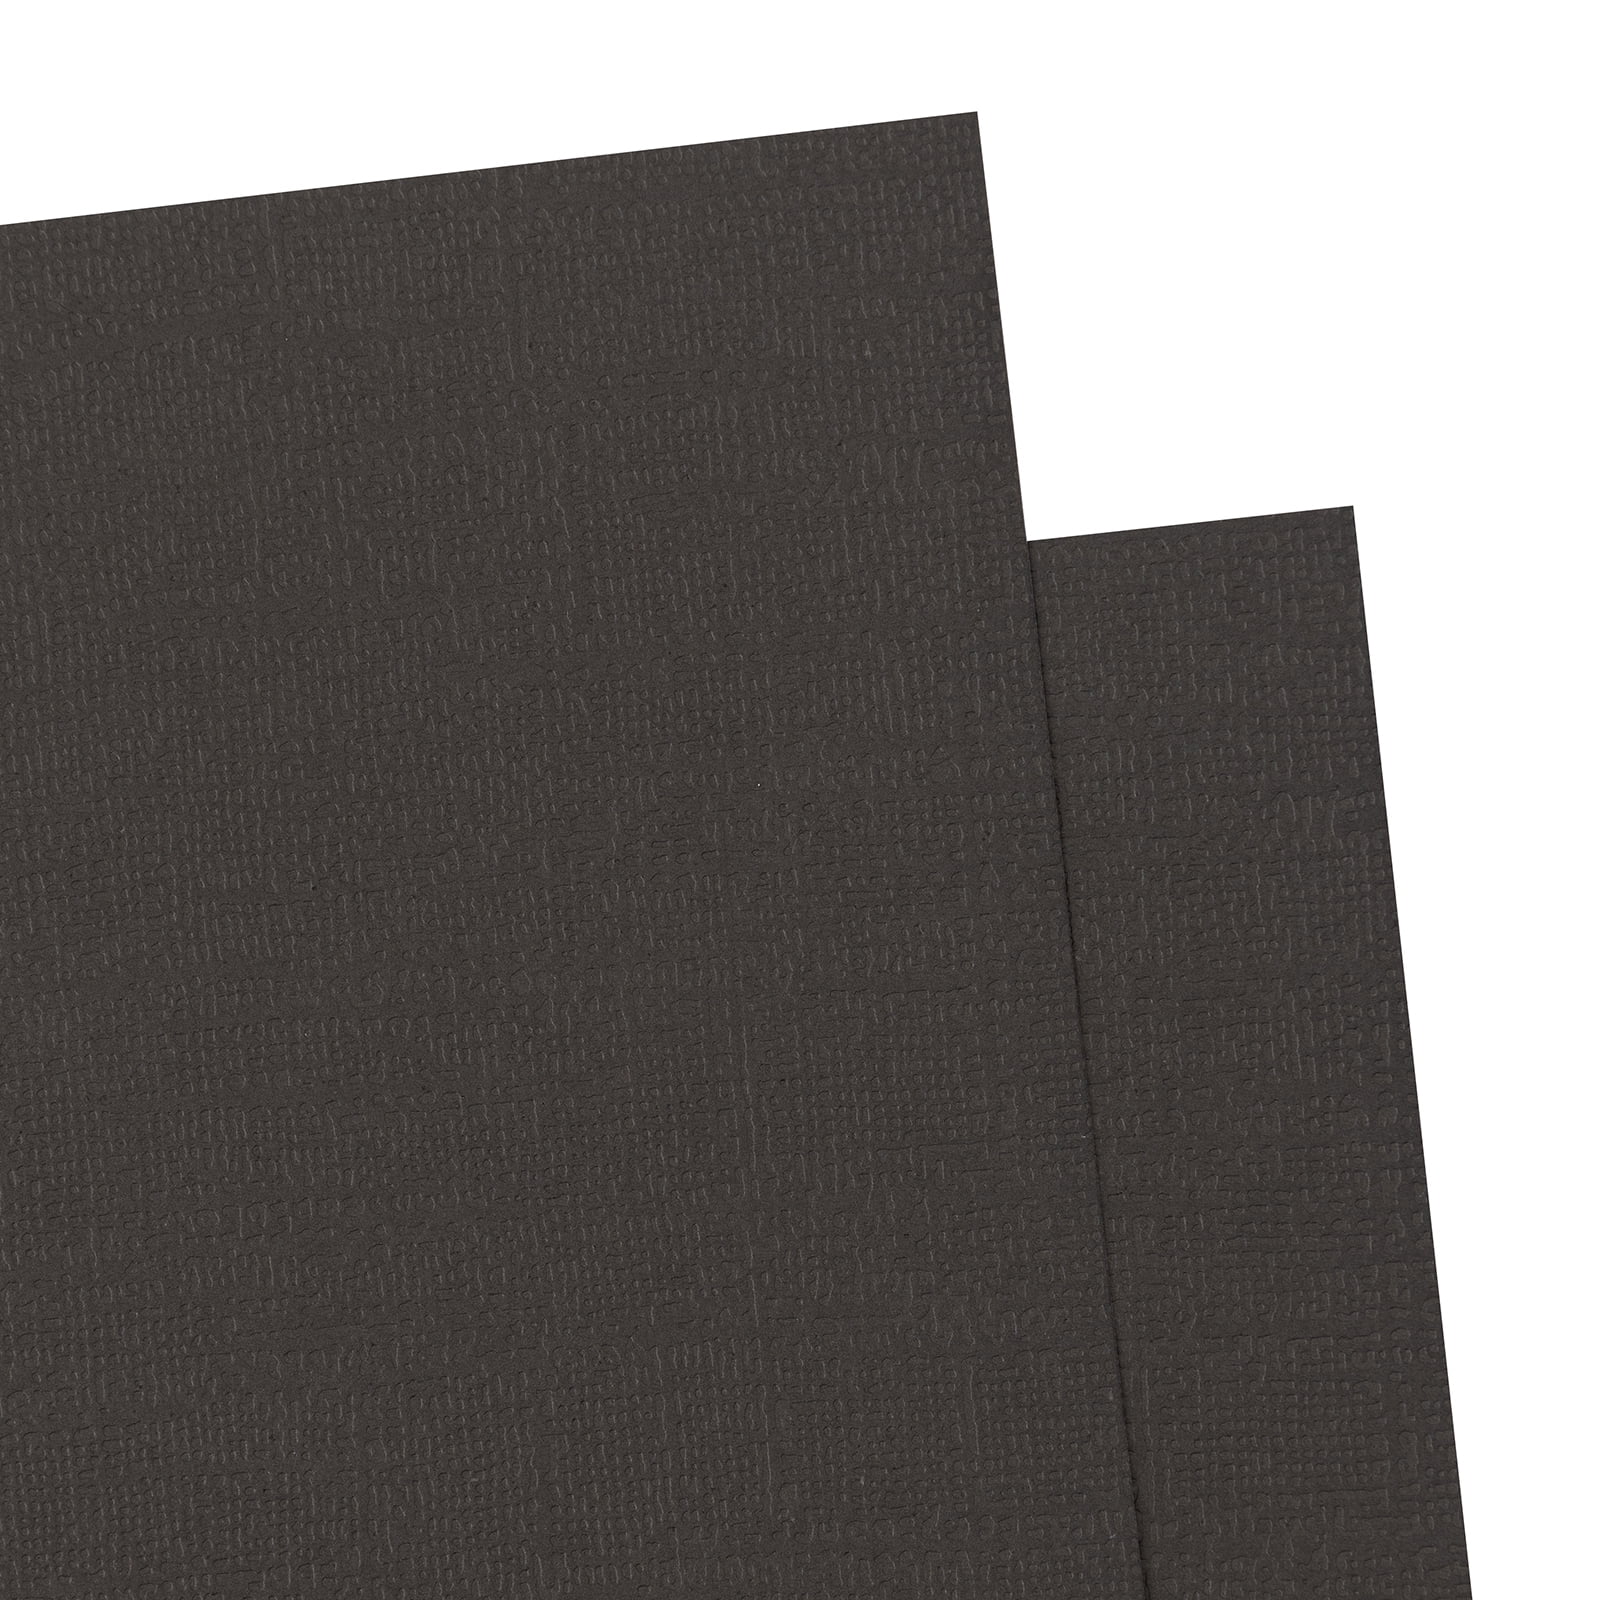 Colorbok Midnight Black Textured Cardstock, 12x12, 121 lb./180 gsm, 30  Sheets 